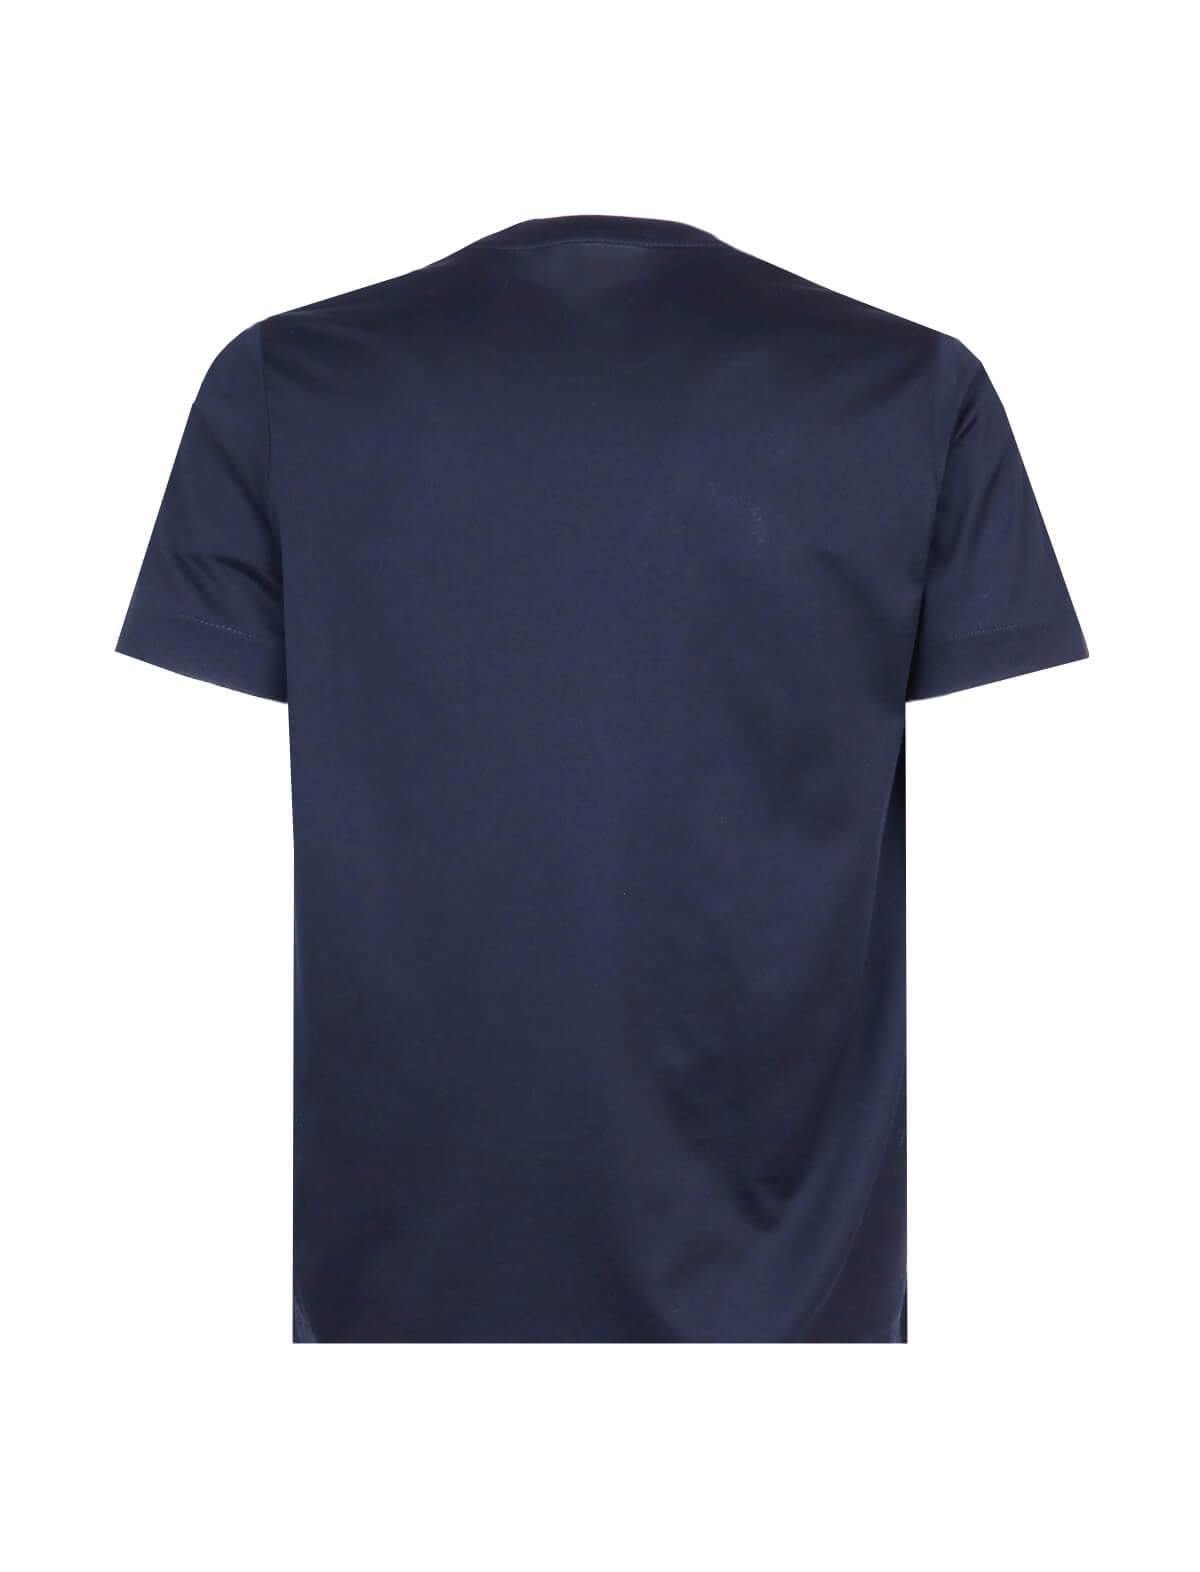 CIRCOLO 1901 Cotton T-Shirt with Front Pocket in Navy Blue | CLOSET Singapore